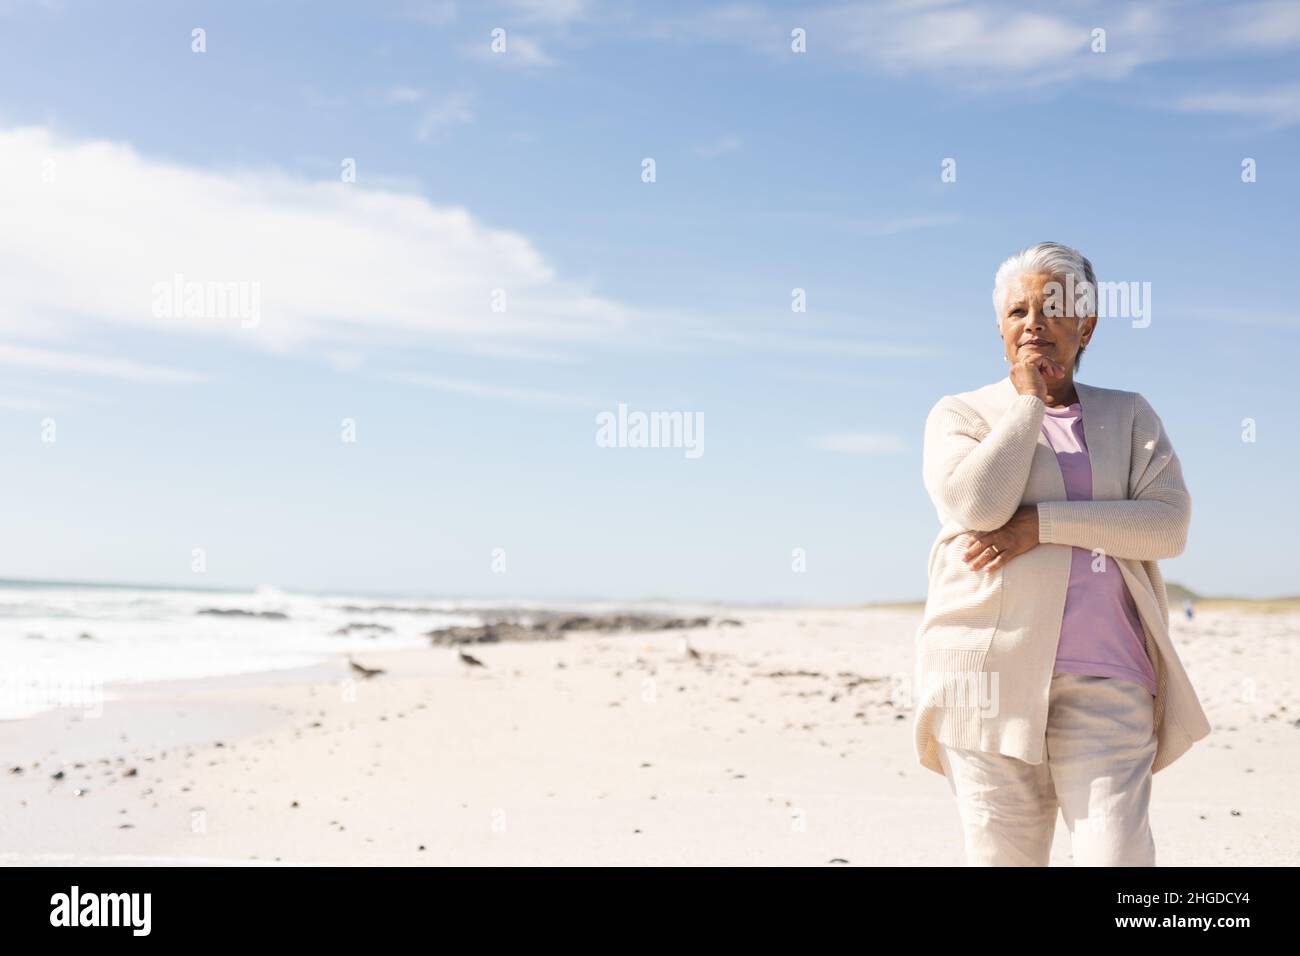 Retired biracial senior woman with hand on chin contemplating at beach against sky during sunny day Stock Photo